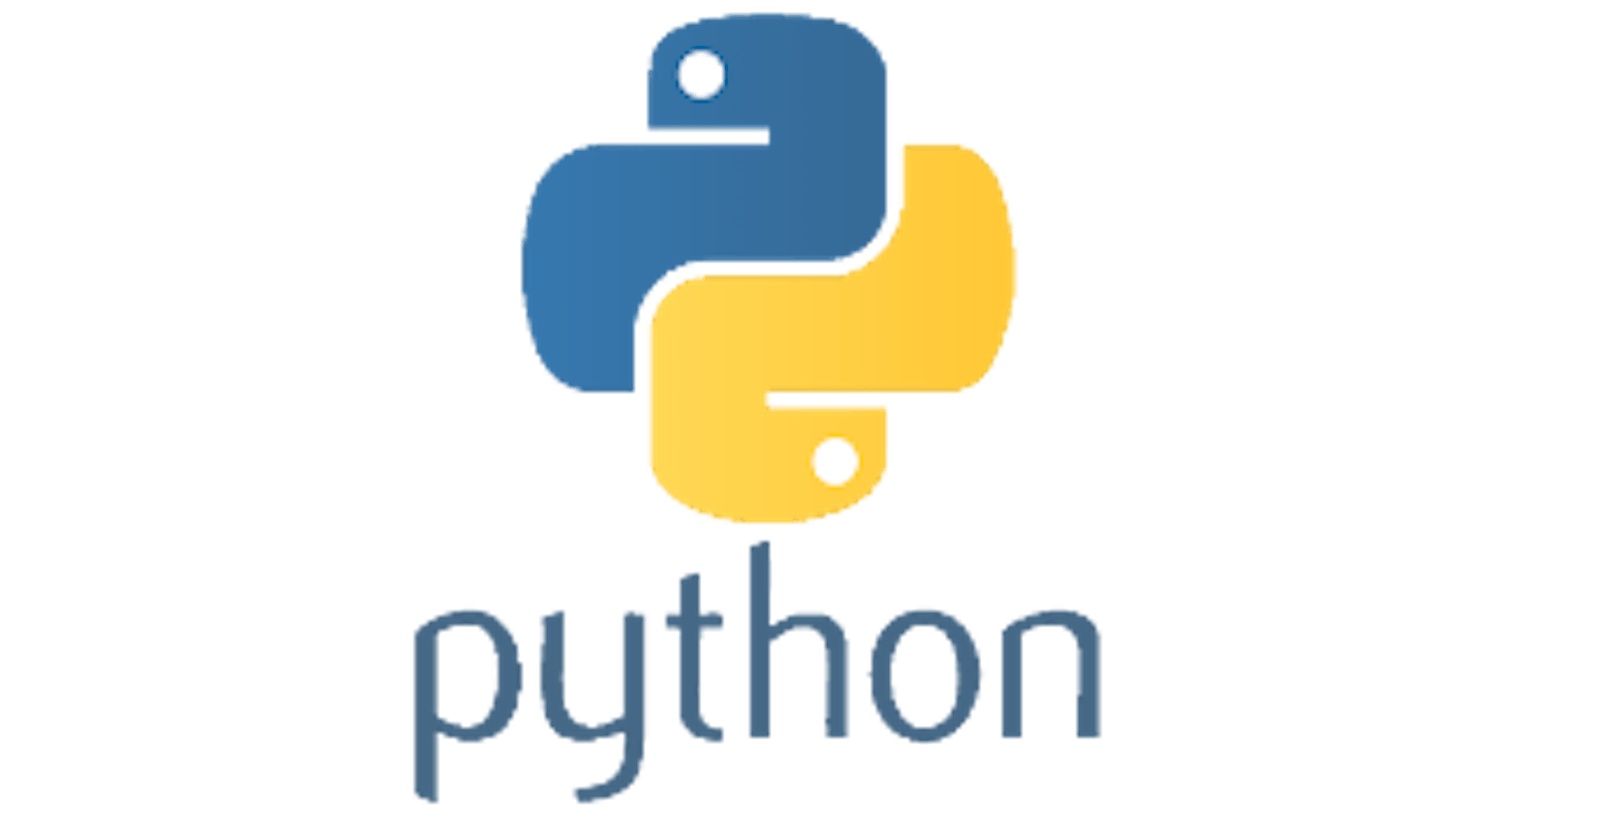 Getting Started with Python : Environment Setup